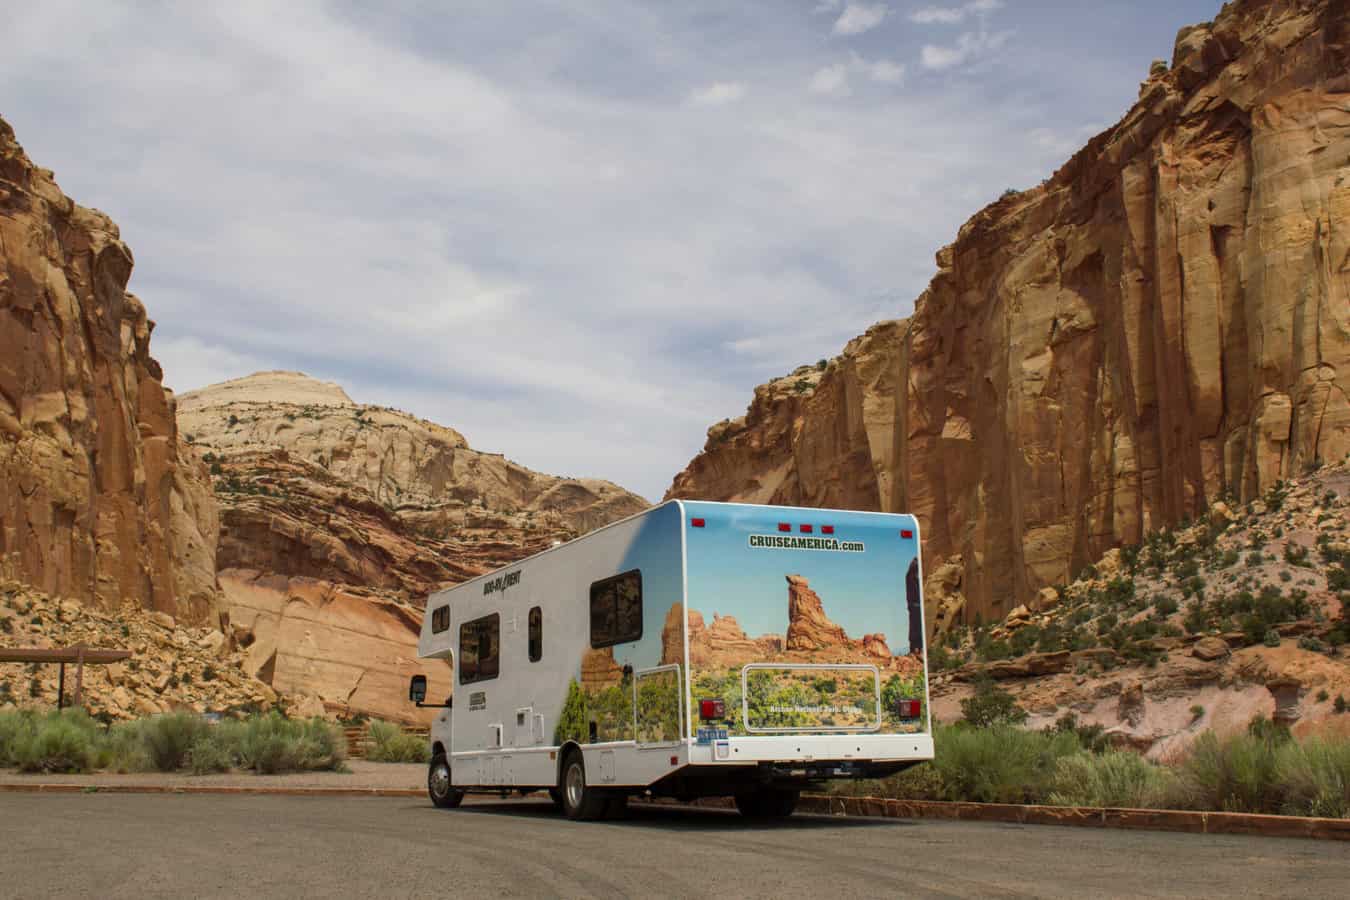 RV rental in front of landscape - feature image for rent an RV for the weekend